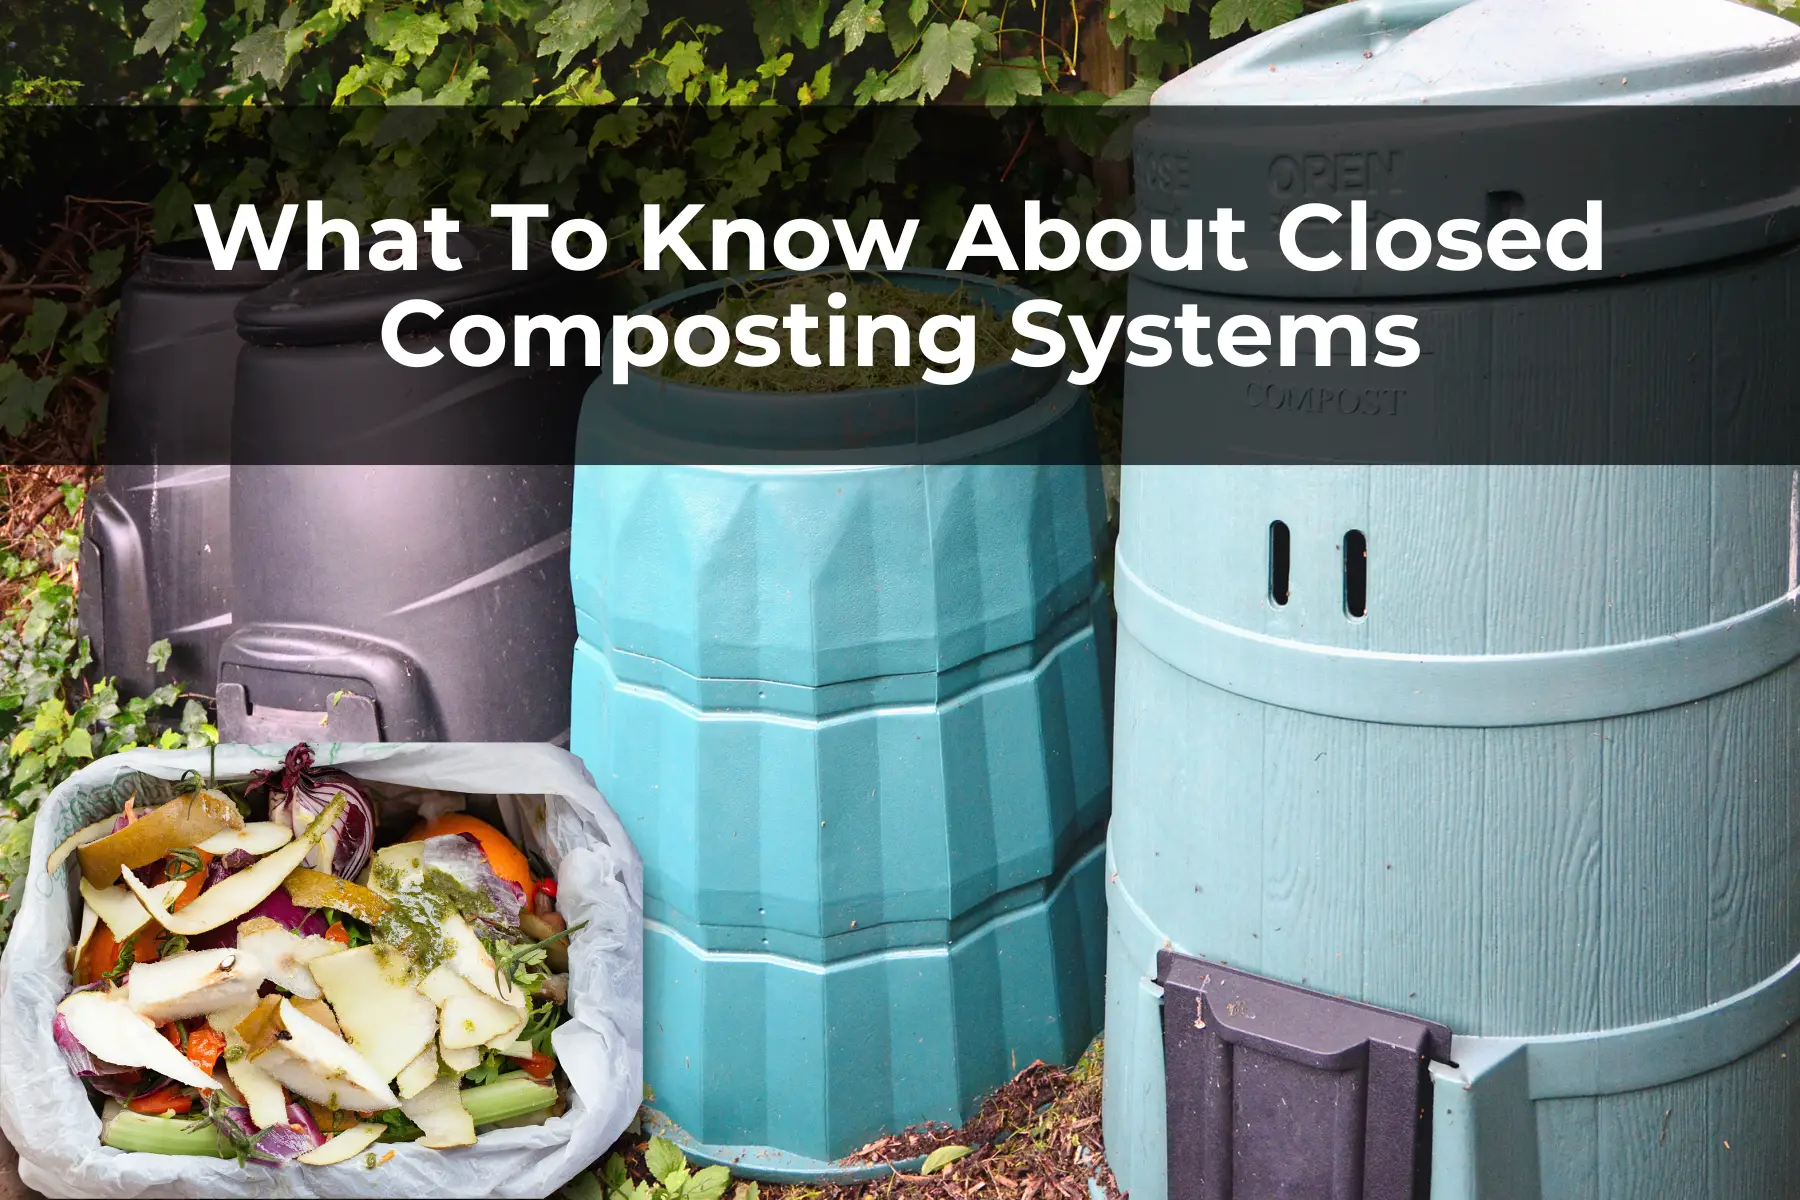 What To Know About Closed Composting Systems